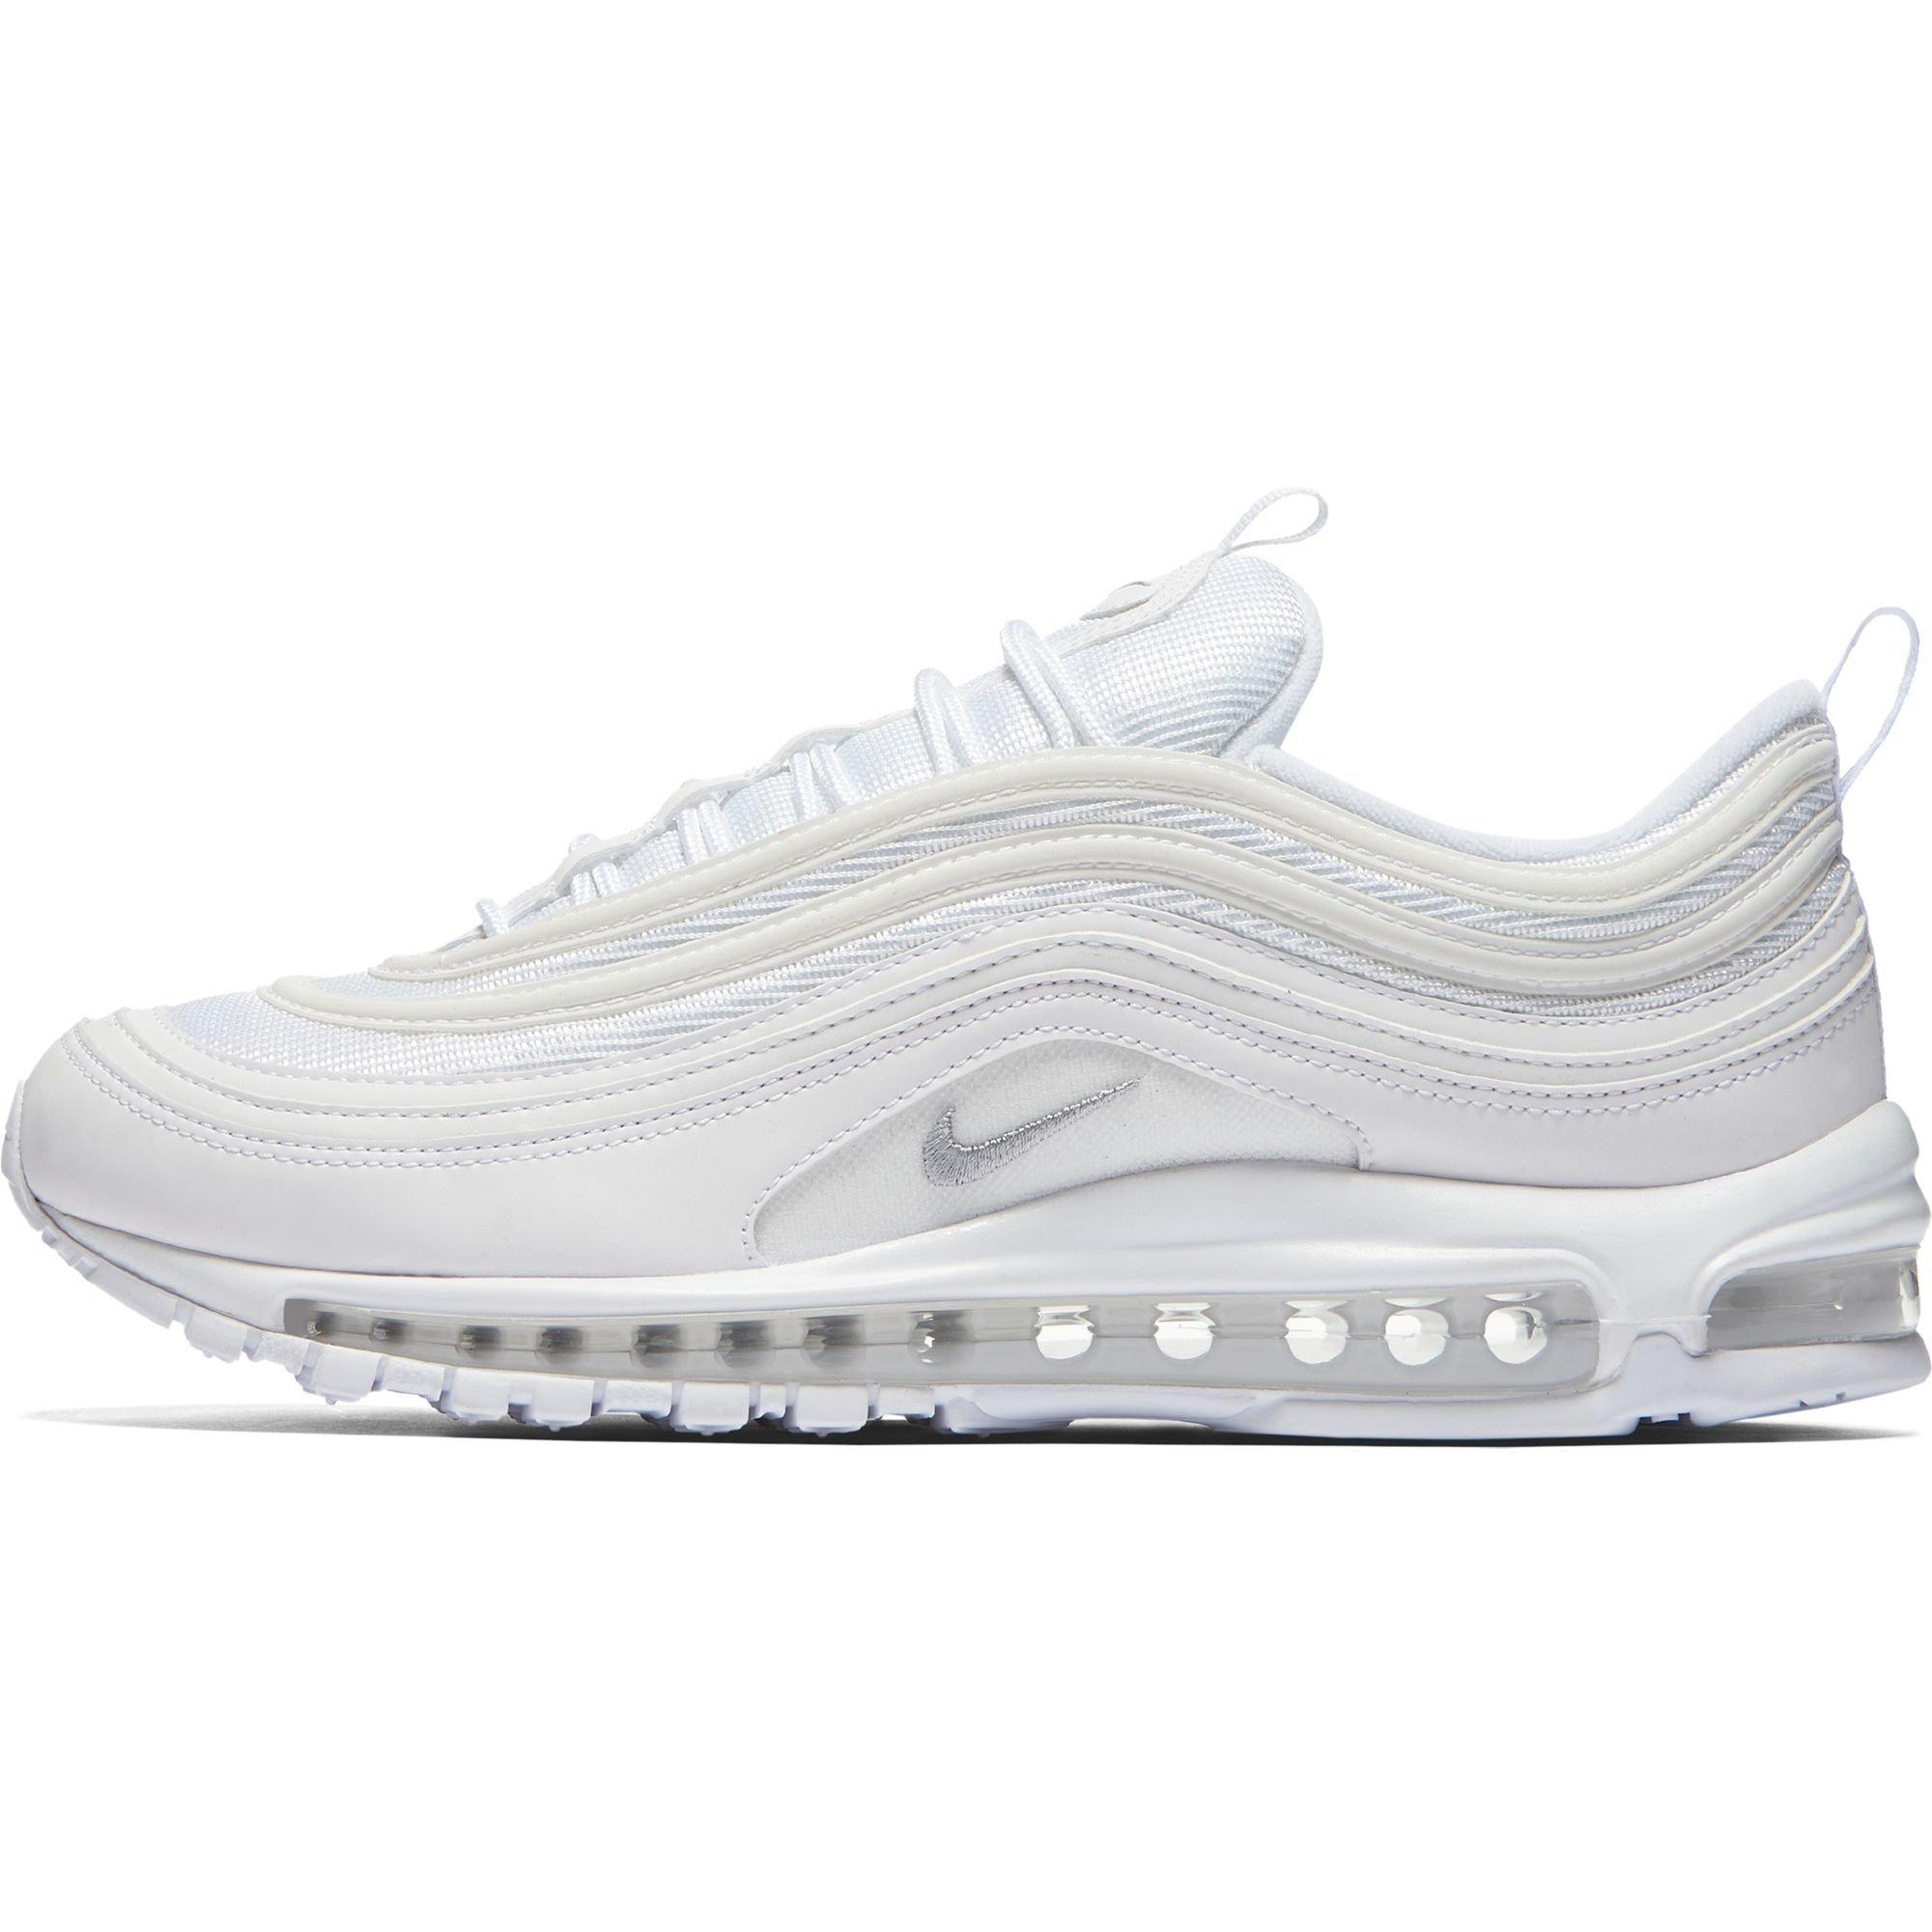 Nike Air Max 97 trainers in white and grey